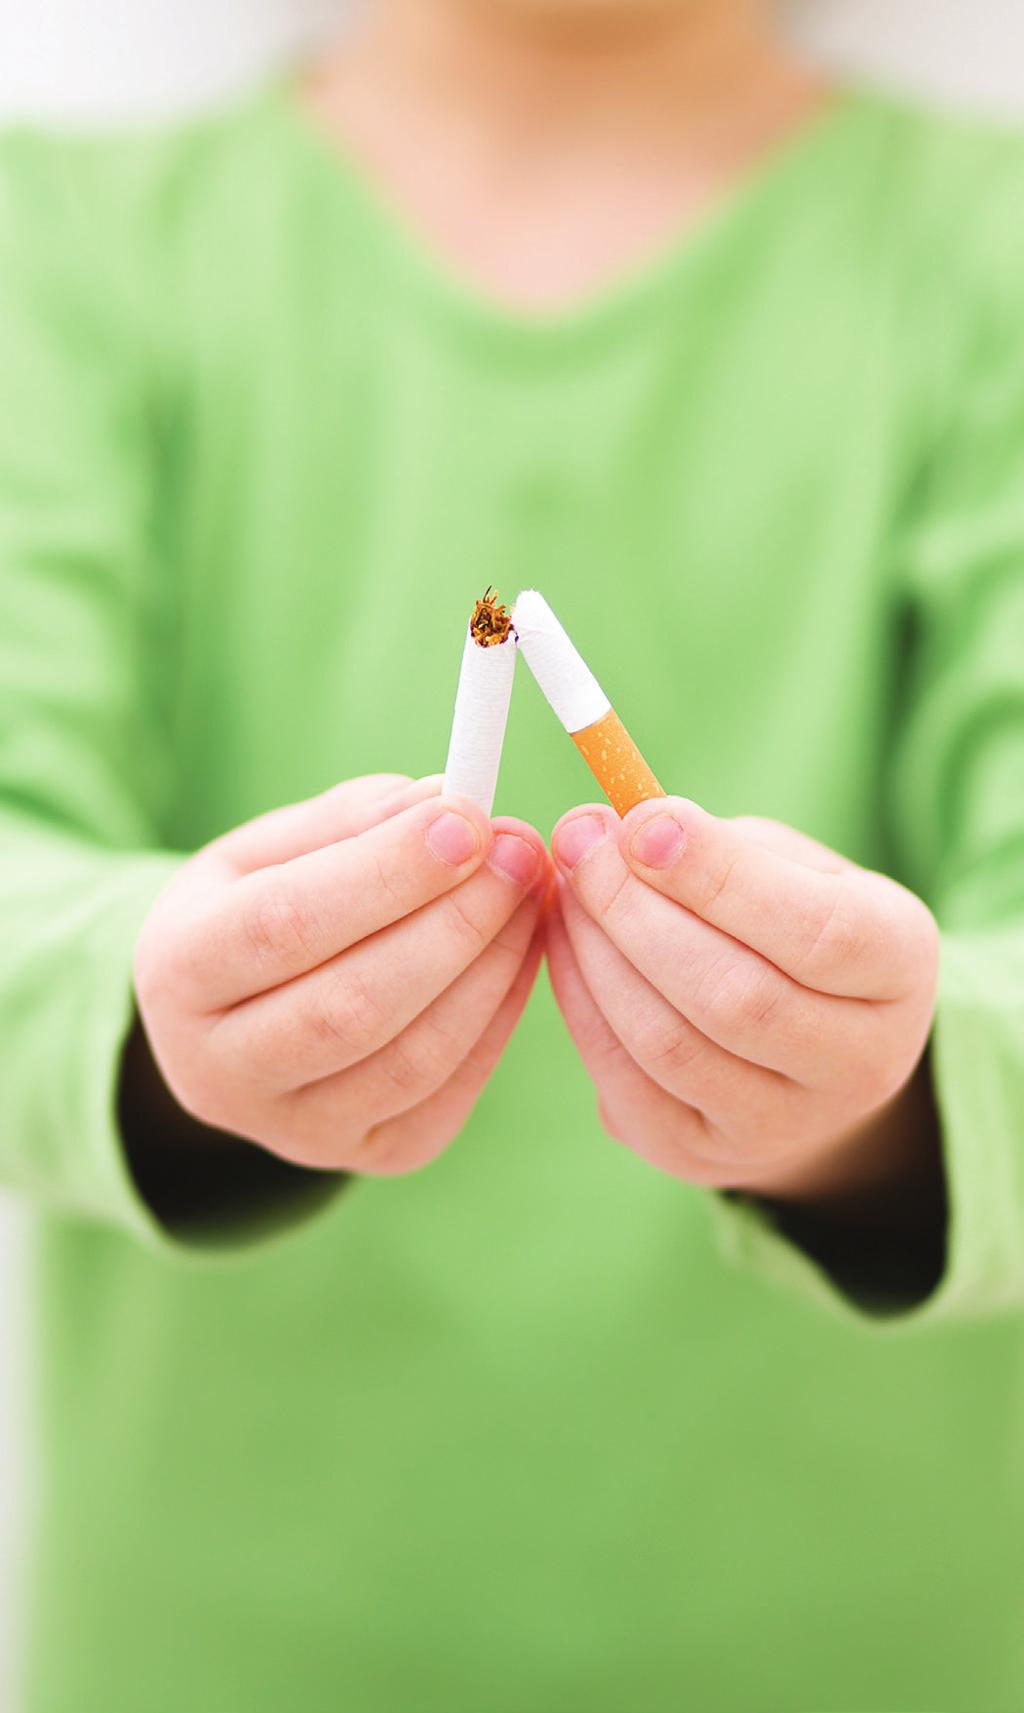 Tobacco Cessation In the 21st century, health experts including the U.S. Surgeon General recognized that smoking causes health problems, such as cancer and heart problems.